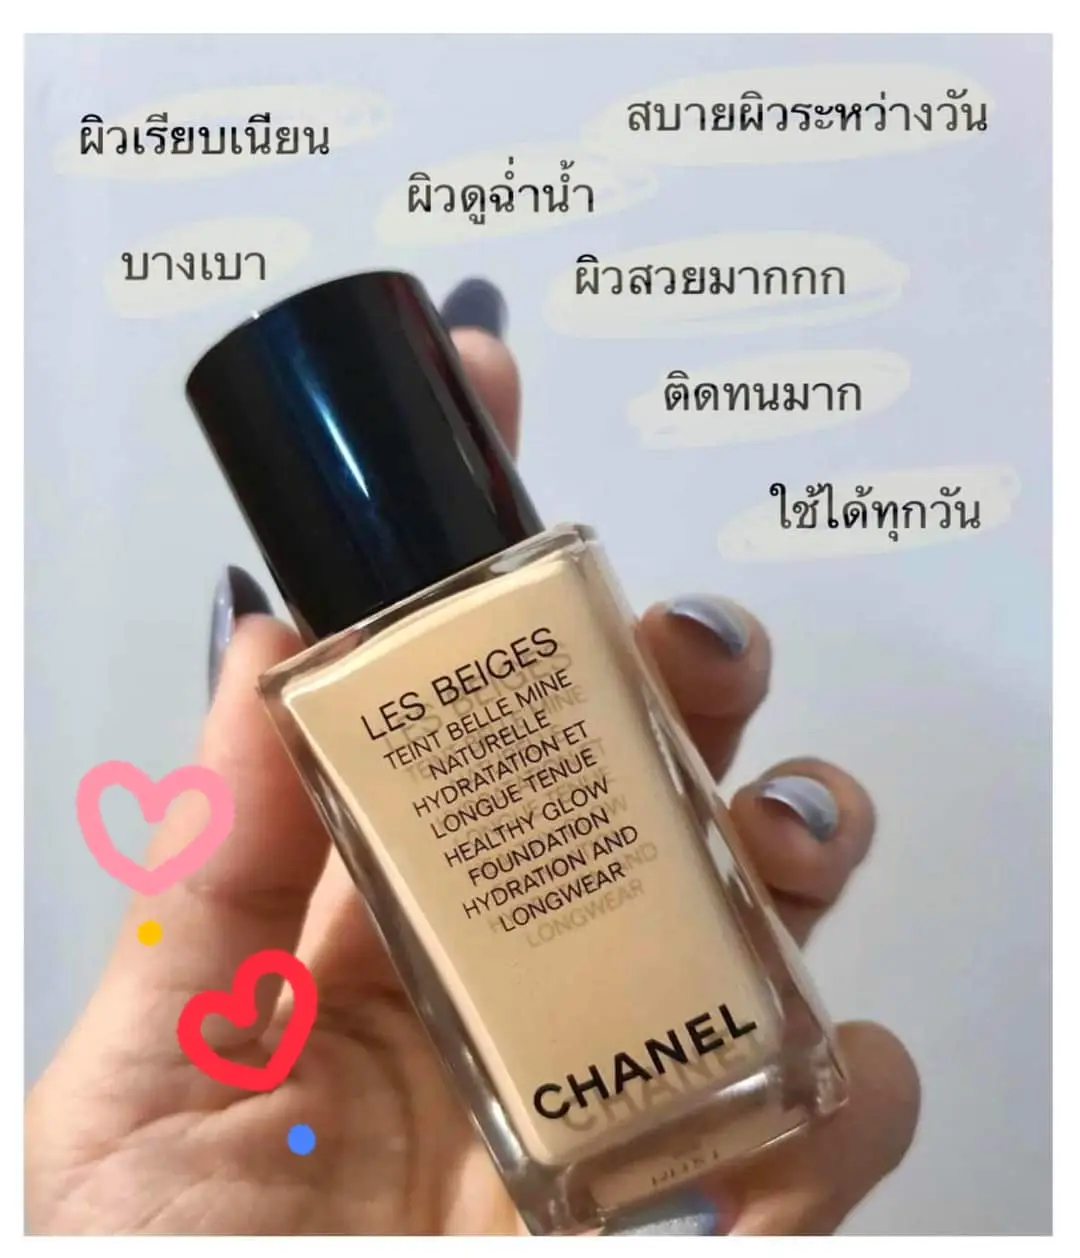 CHANEL'S SKIN COMPLETE Sweetheart Foundation 💫, Gallery posted by  hwpoyyyyyyyy